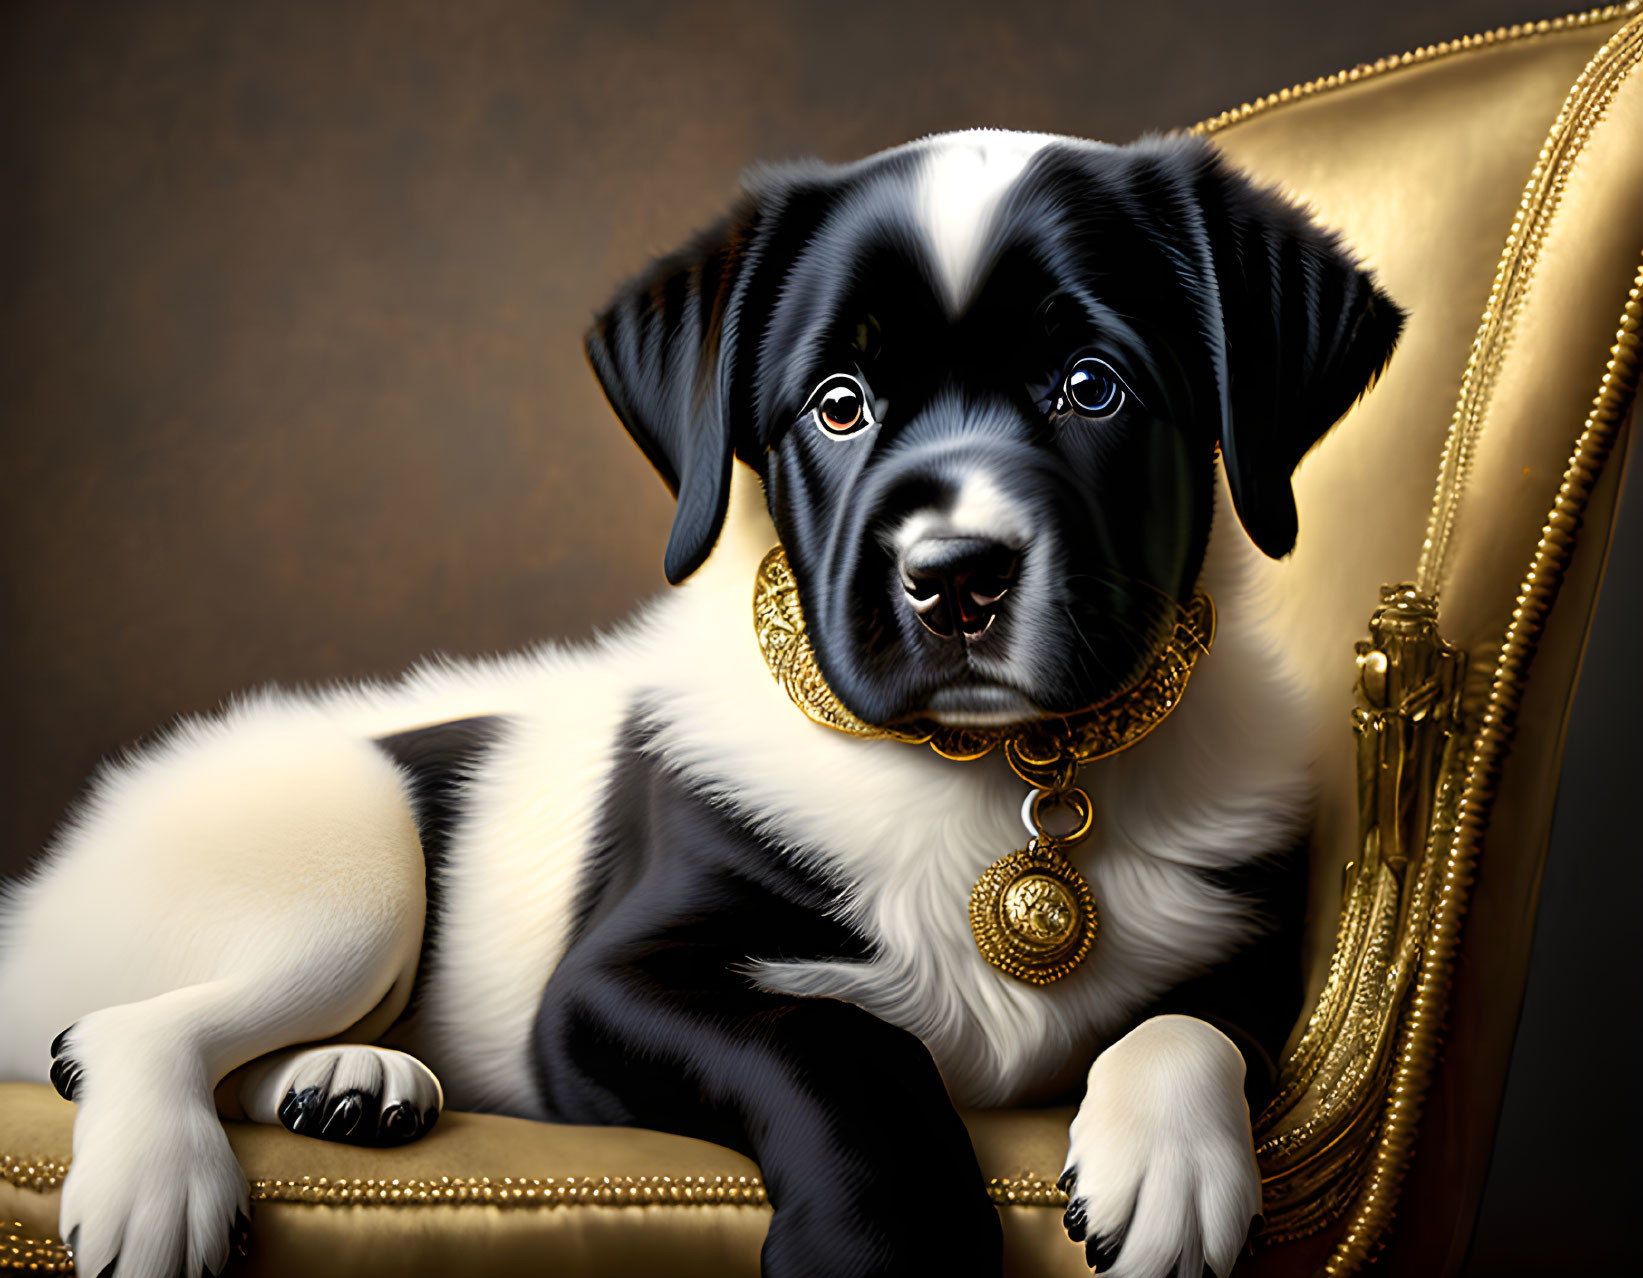 Regal black and white puppy on golden chair against dark backdrop